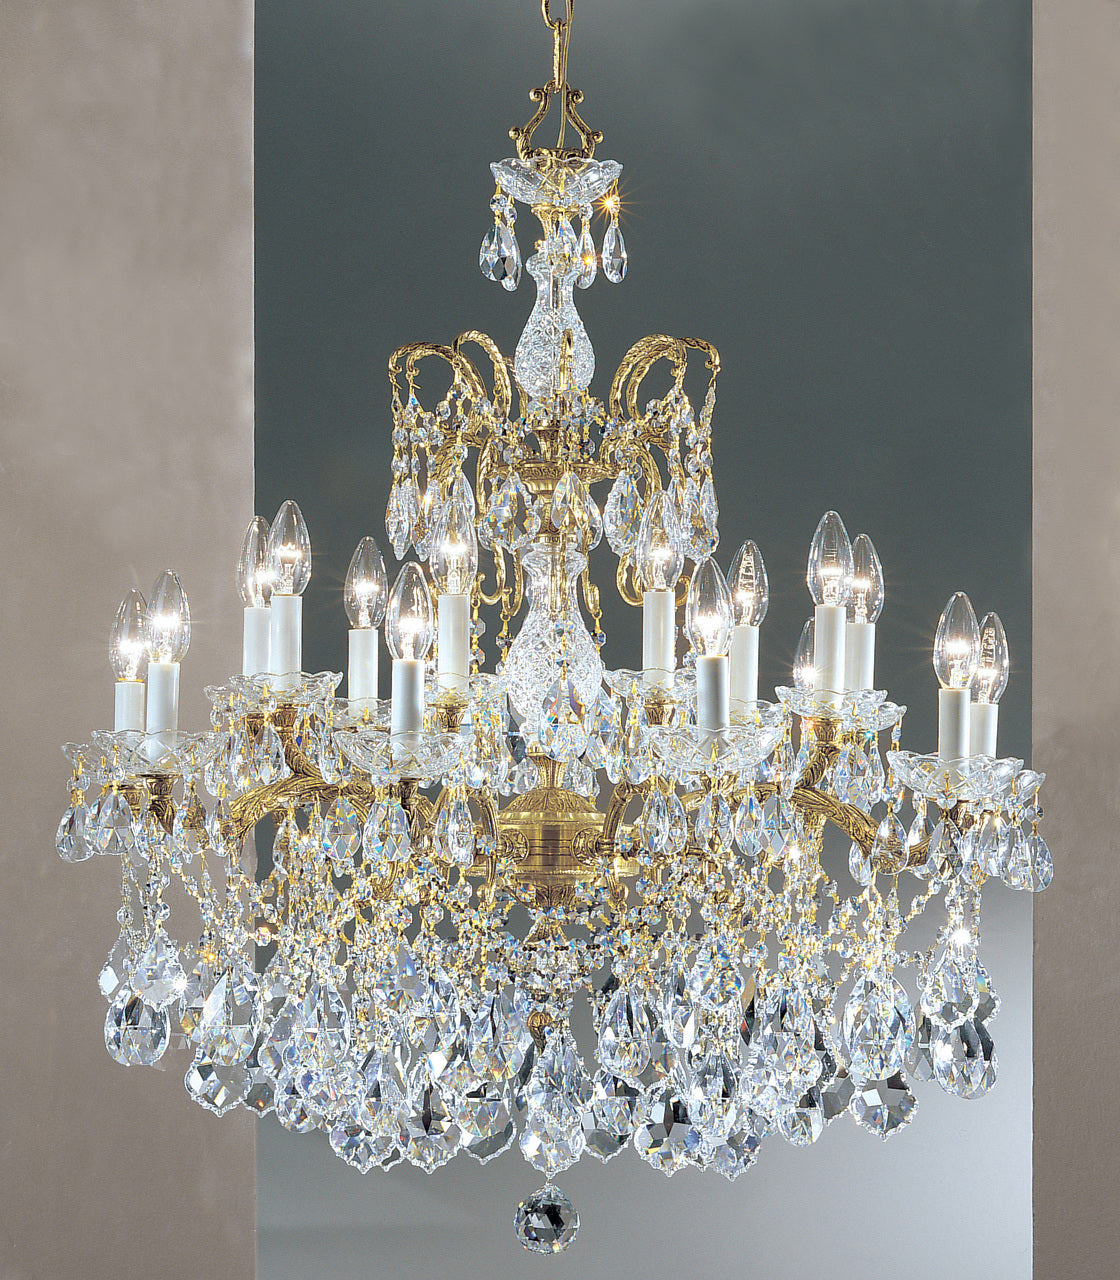 Classic Lighting 5548 OWB SC Madrid Imperial Crystal/Cast Brass Chandelier in Olde World Bronze (Imported from Spain)